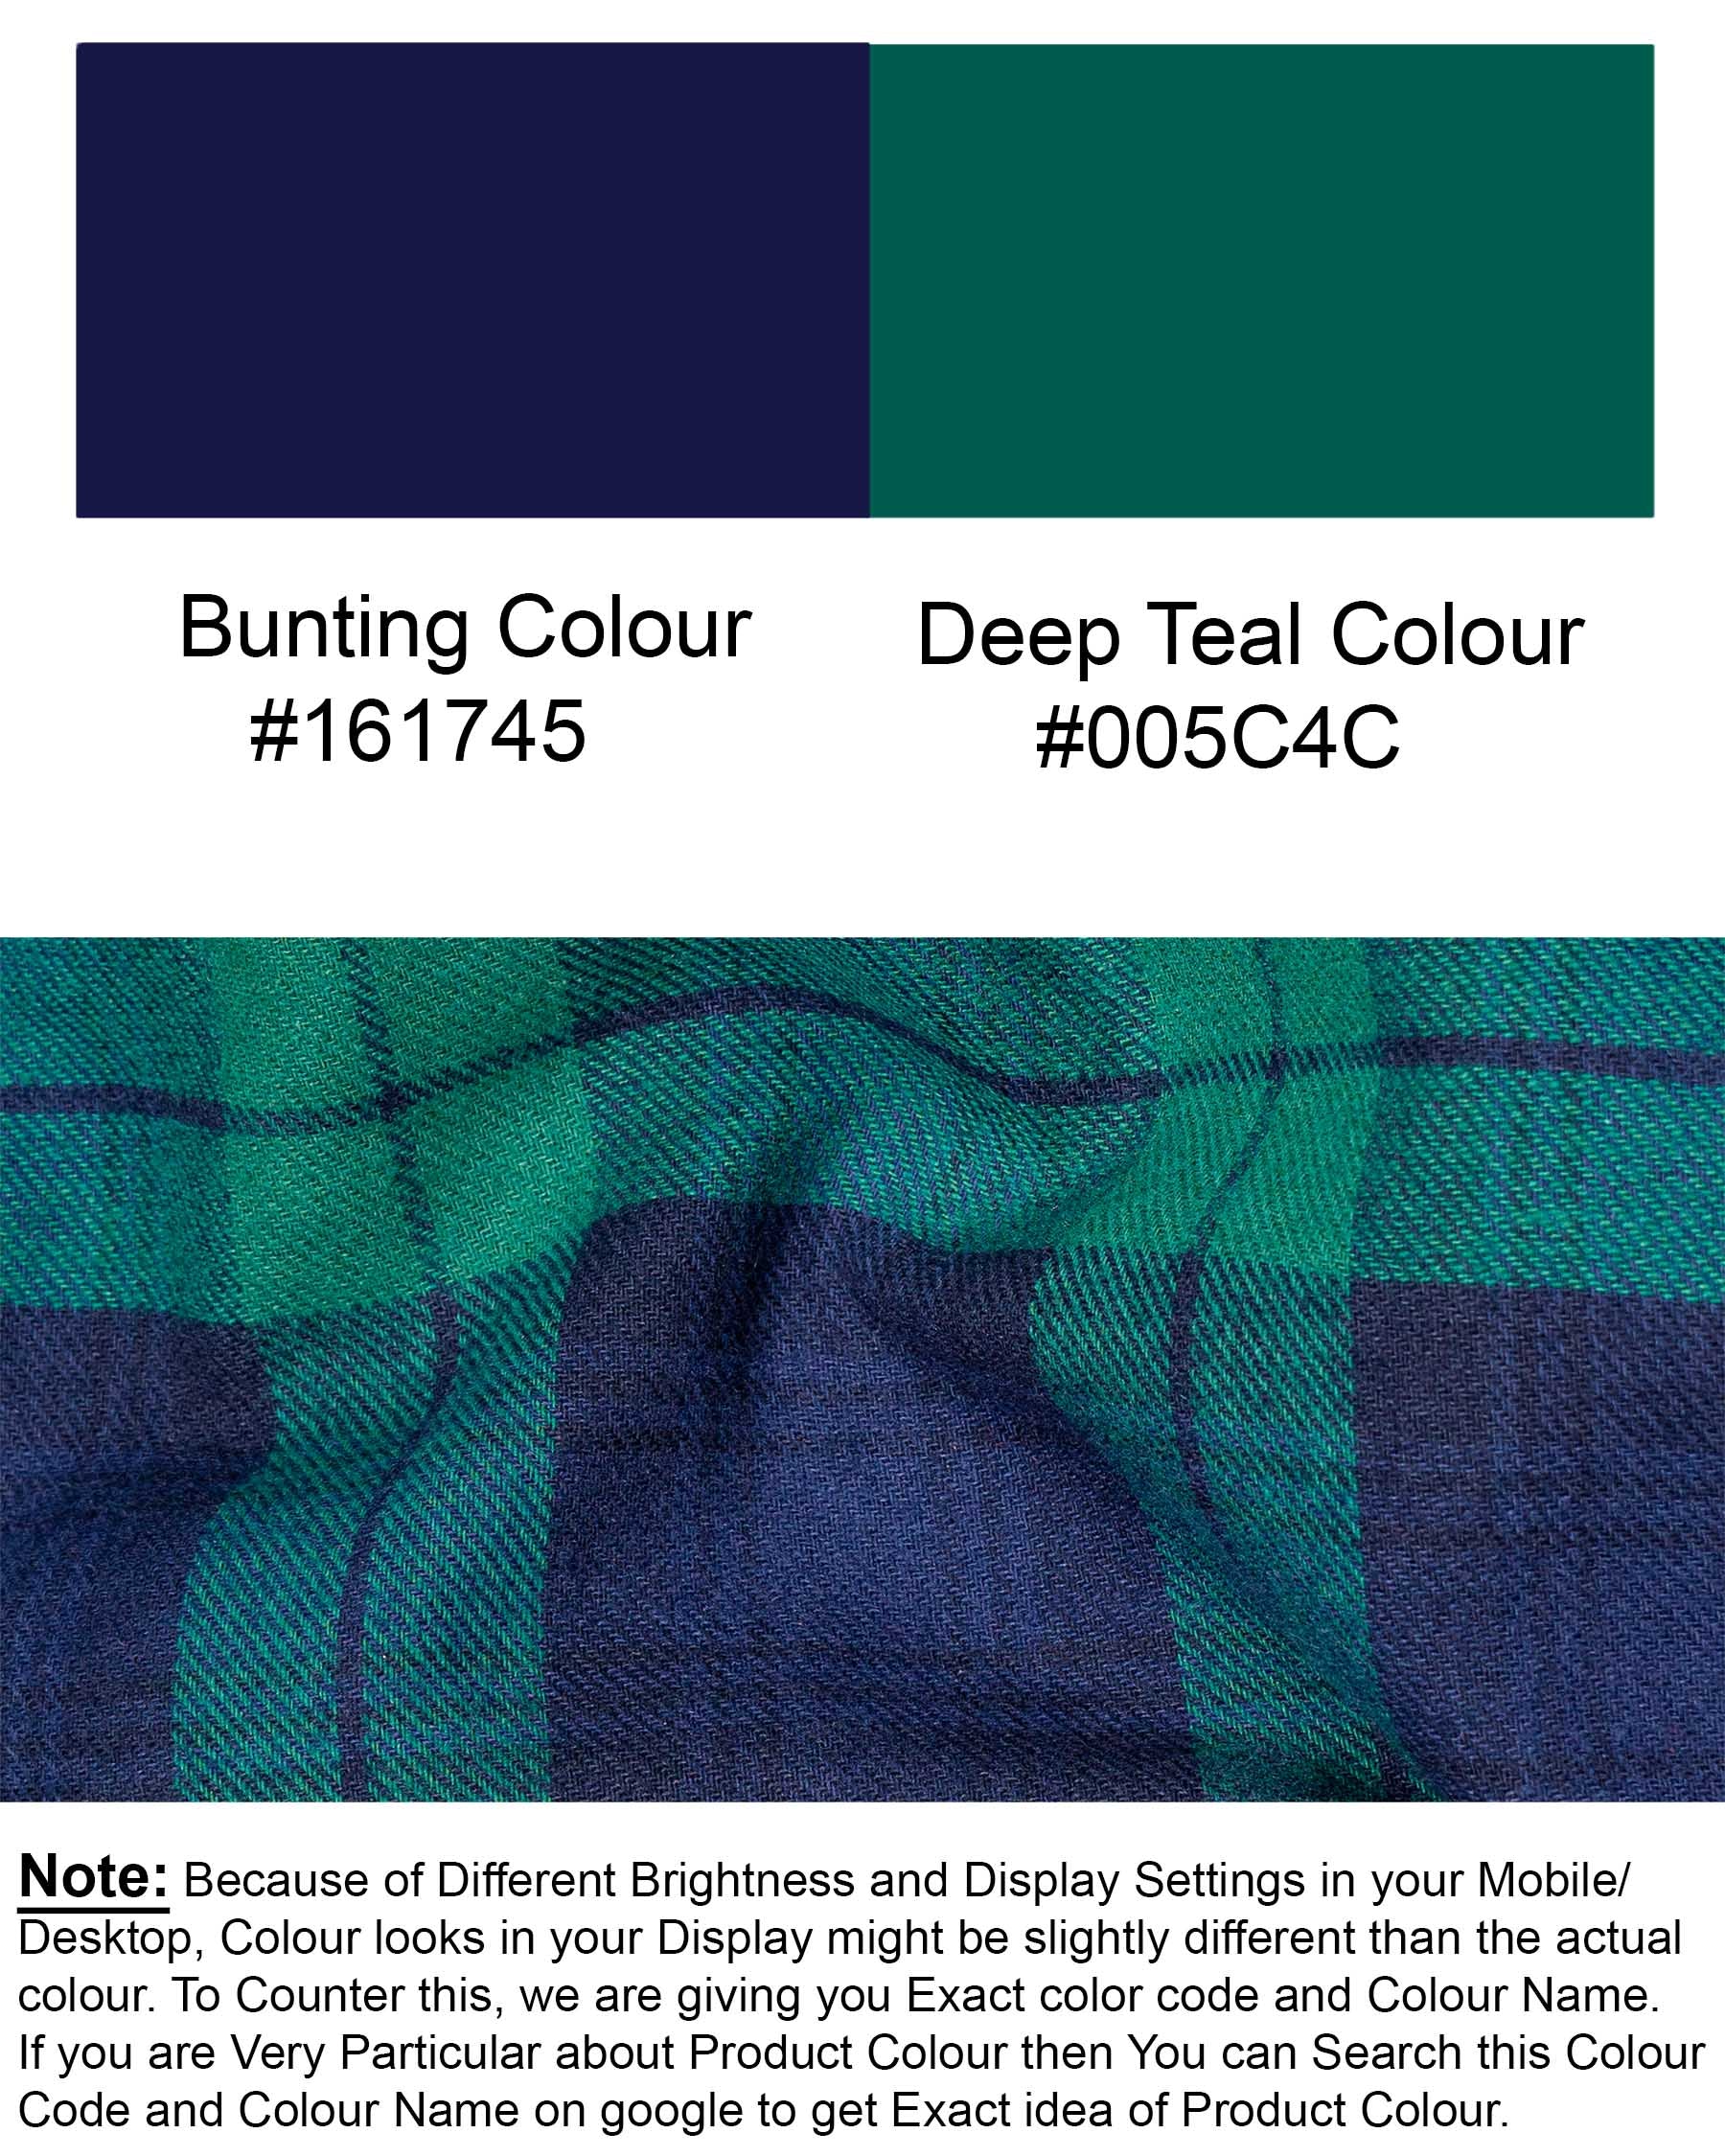 Bunting Blue and Deep Teal Green Plaid Flannel Shirt 6997-BD-38,6997-BD-38,6997-BD-39,6997-BD-39,6997-BD-40,6997-BD-40,6997-BD-42,6997-BD-42,6997-BD-44,6997-BD-44,6997-BD-46,6997-BD-46,6997-BD-48,6997-BD-48,6997-BD-50,6997-BD-50,6997-BD-52,6997-BD-52